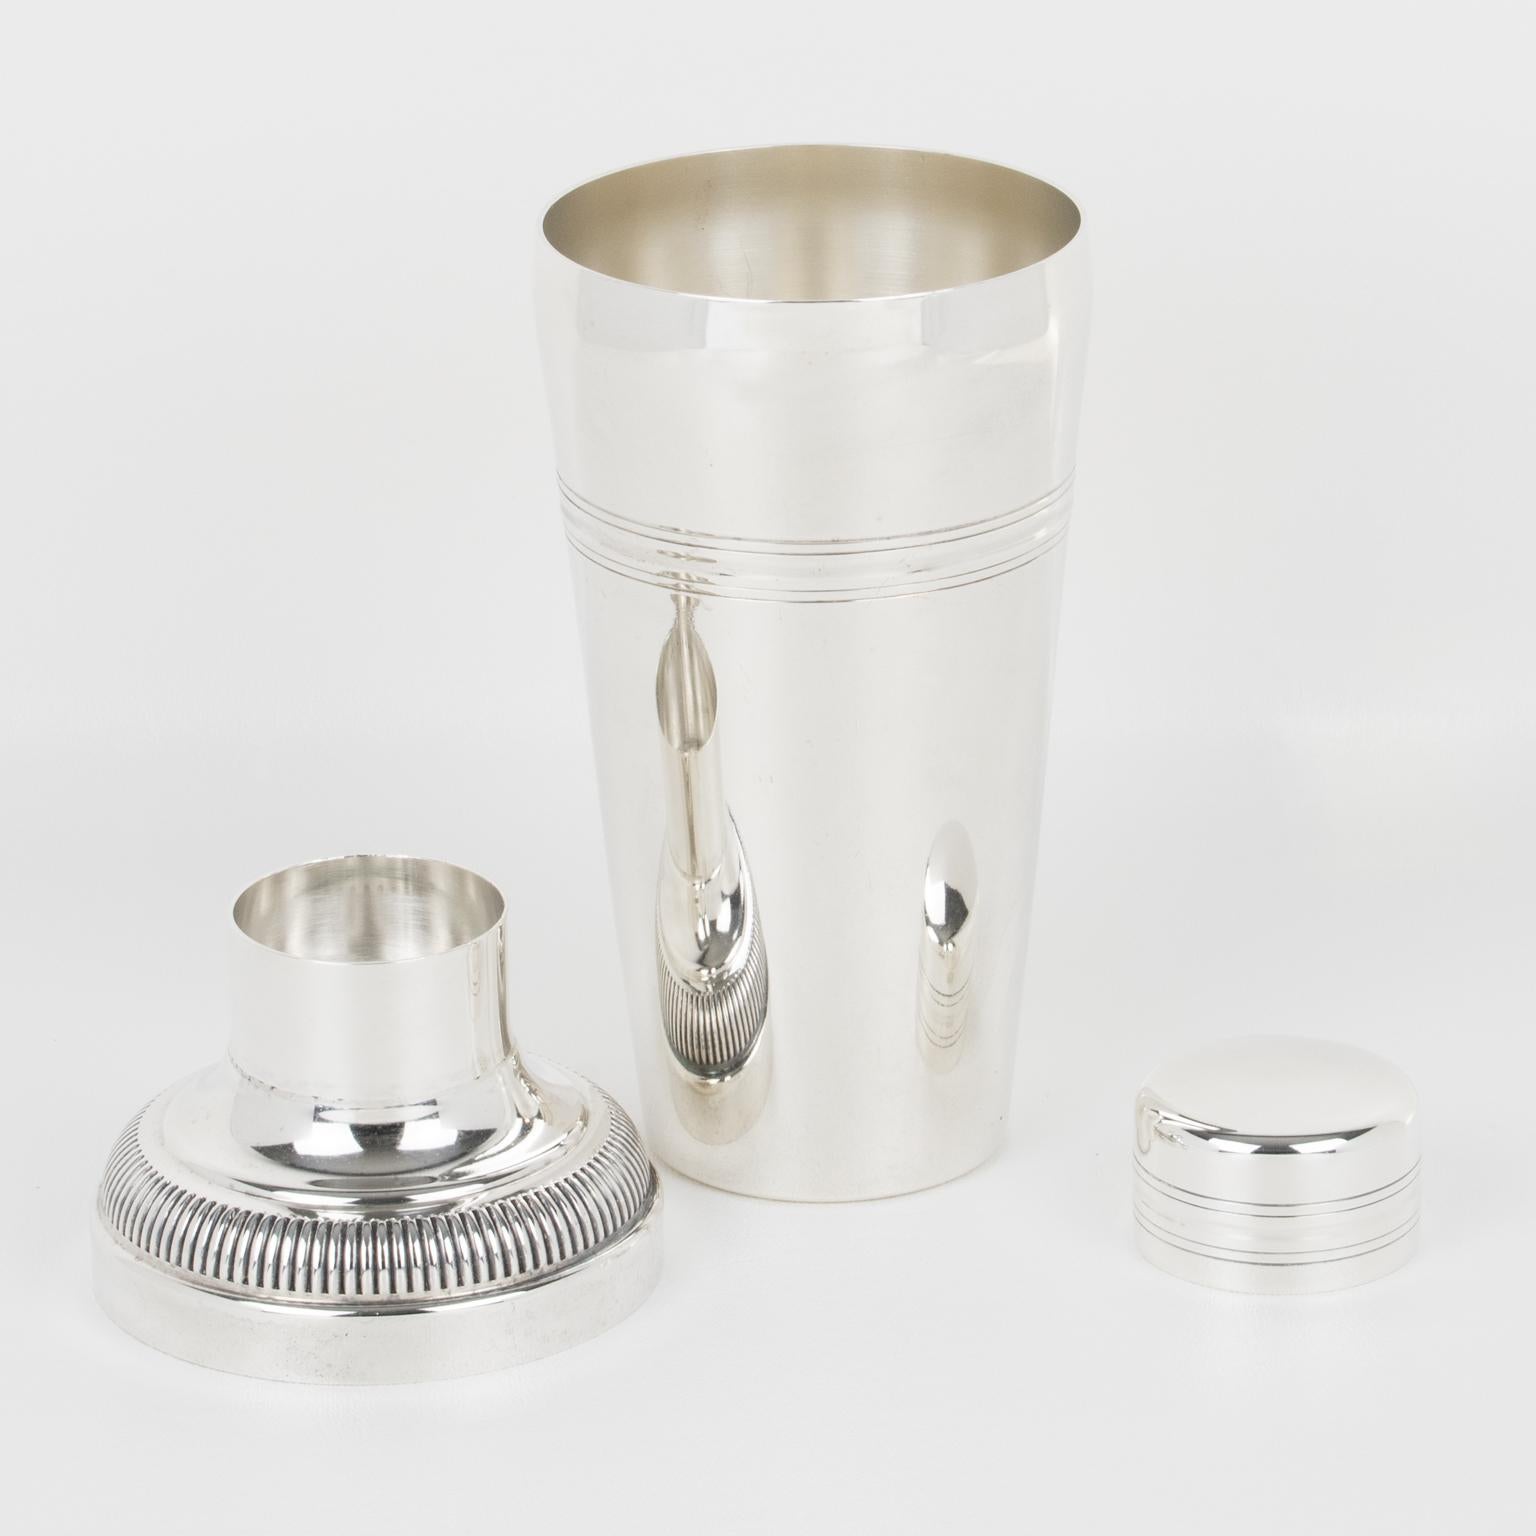 This fabulous French Art Deco silver plate cylindrical cocktail or Martini shaker was crafted by silversmith Gelb, Paris, in the 1940s. The three-sectioned cocktail shaker has a removable cap and strainer. The piece boasts a lovely geometric shape